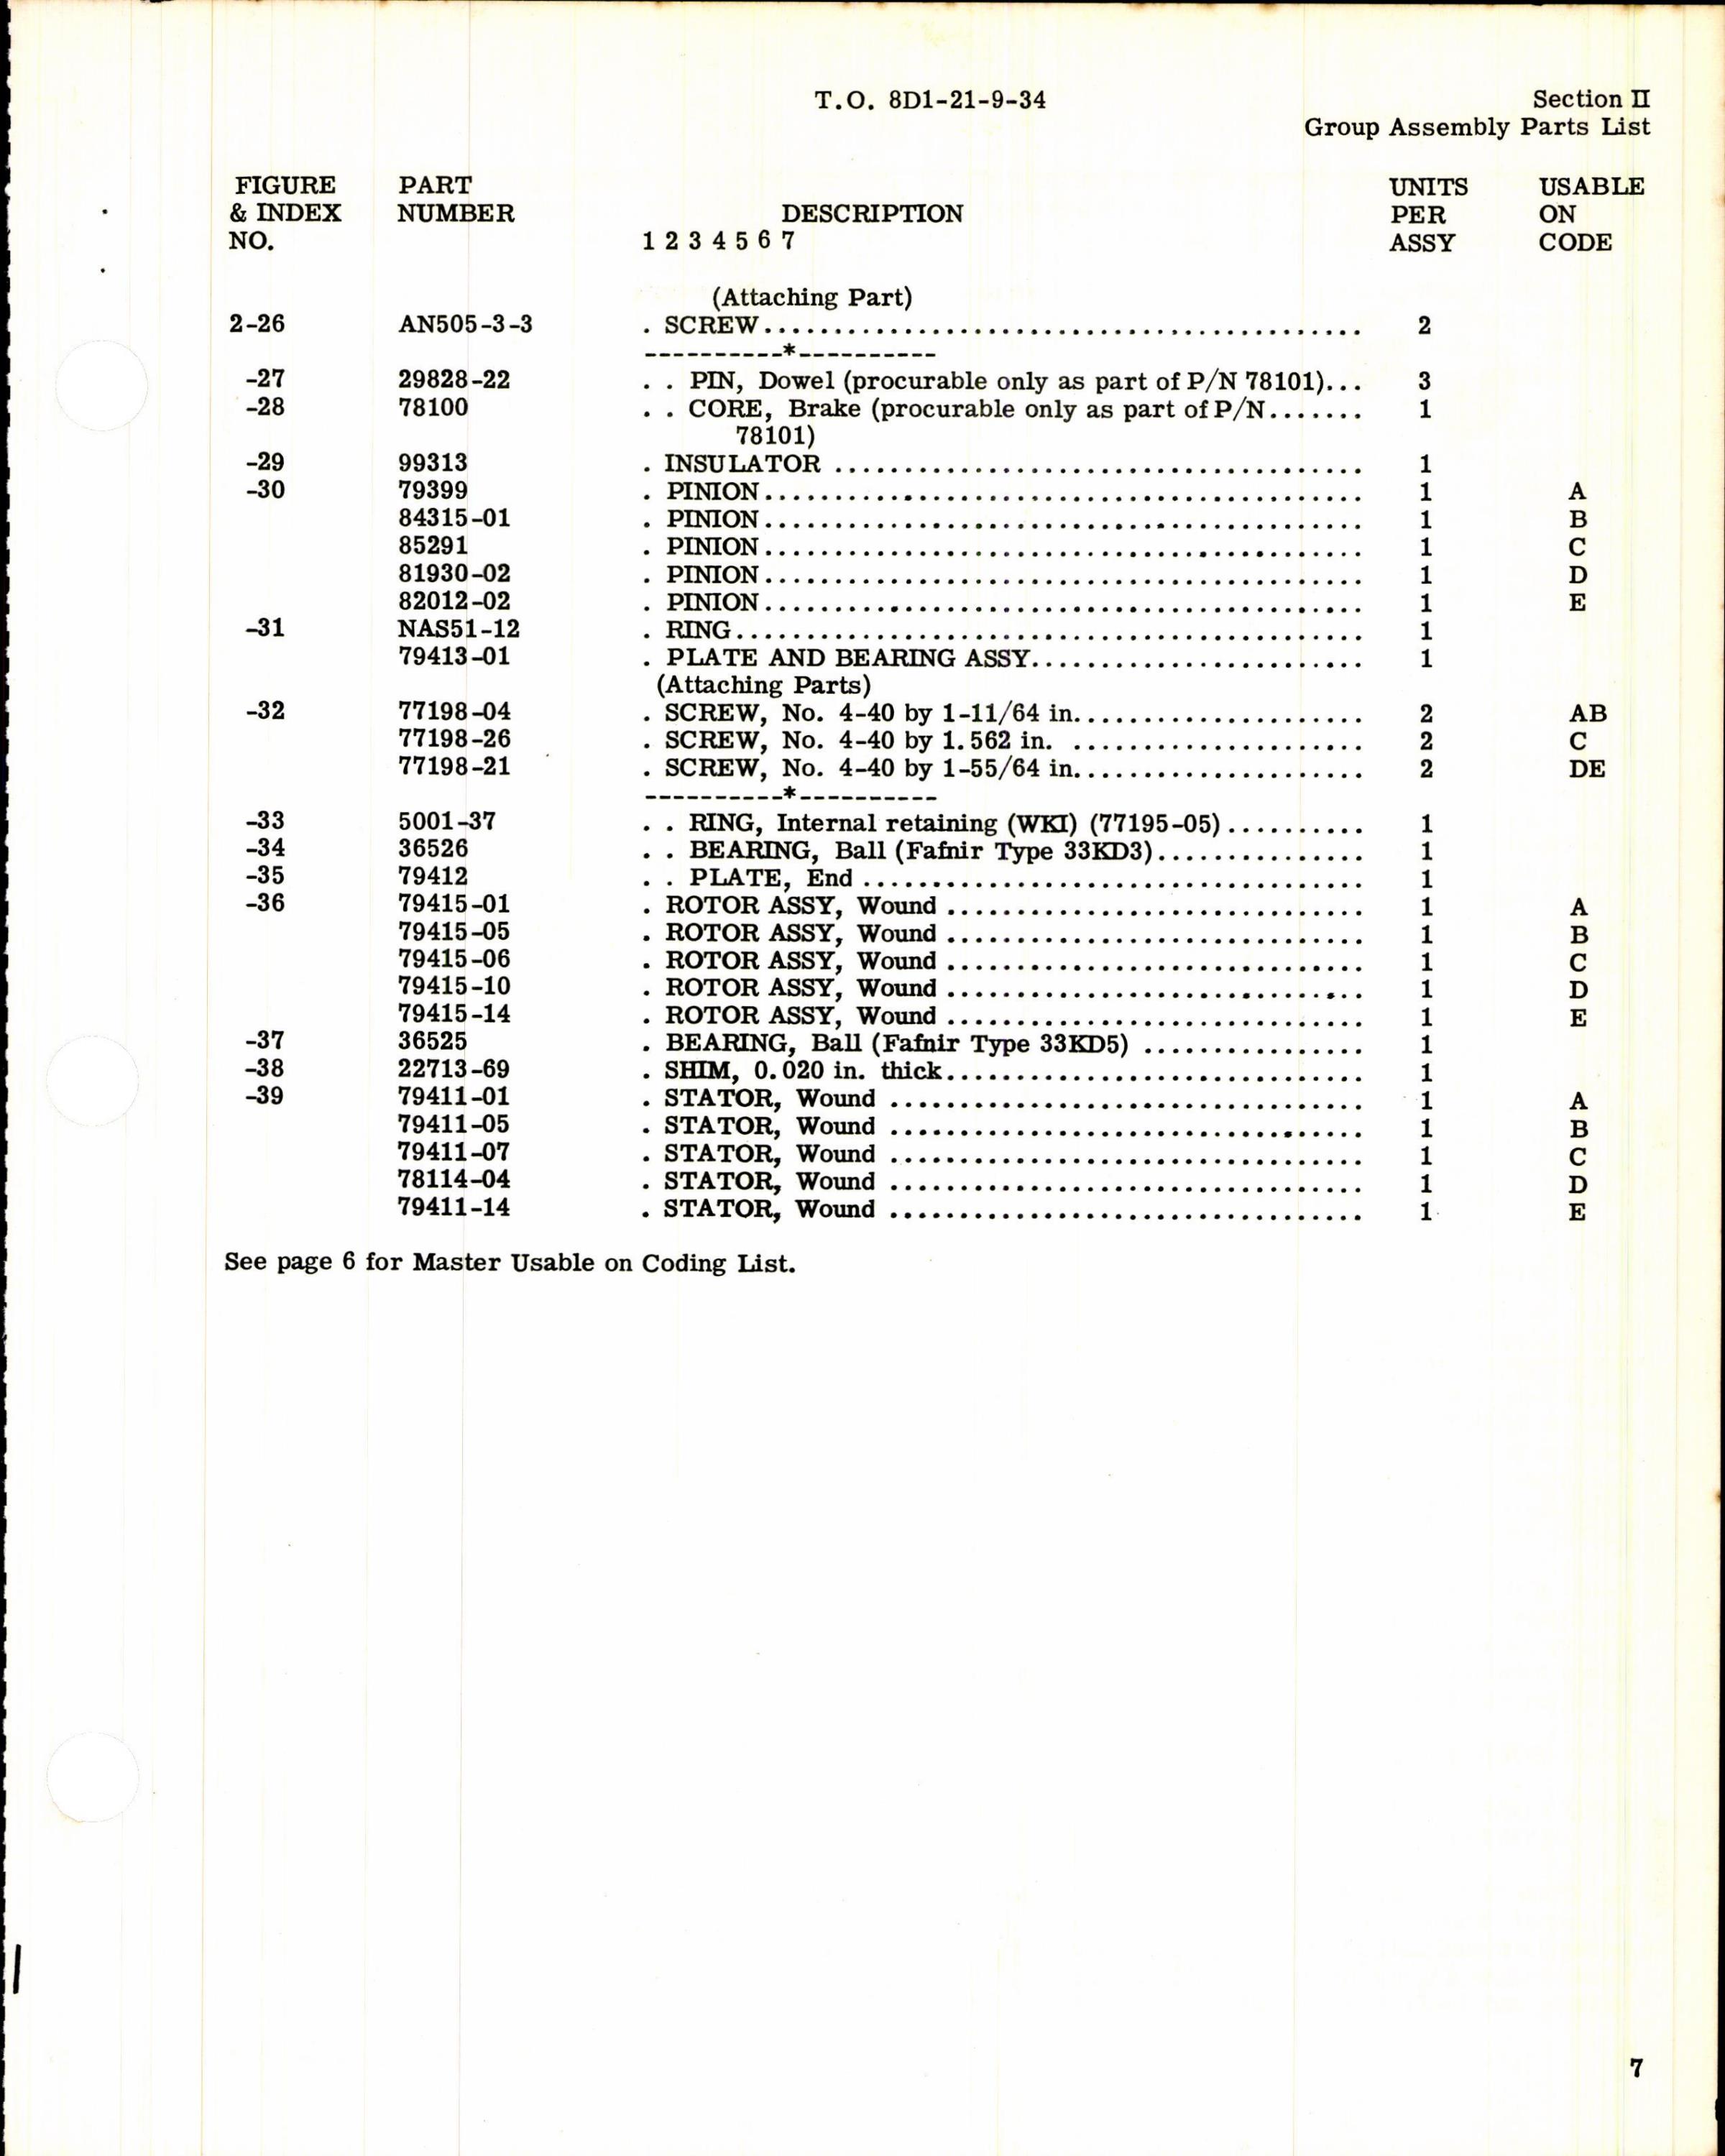 Sample page 5 from AirCorps Library document: Illustrated Parts Breakdown for Lear 